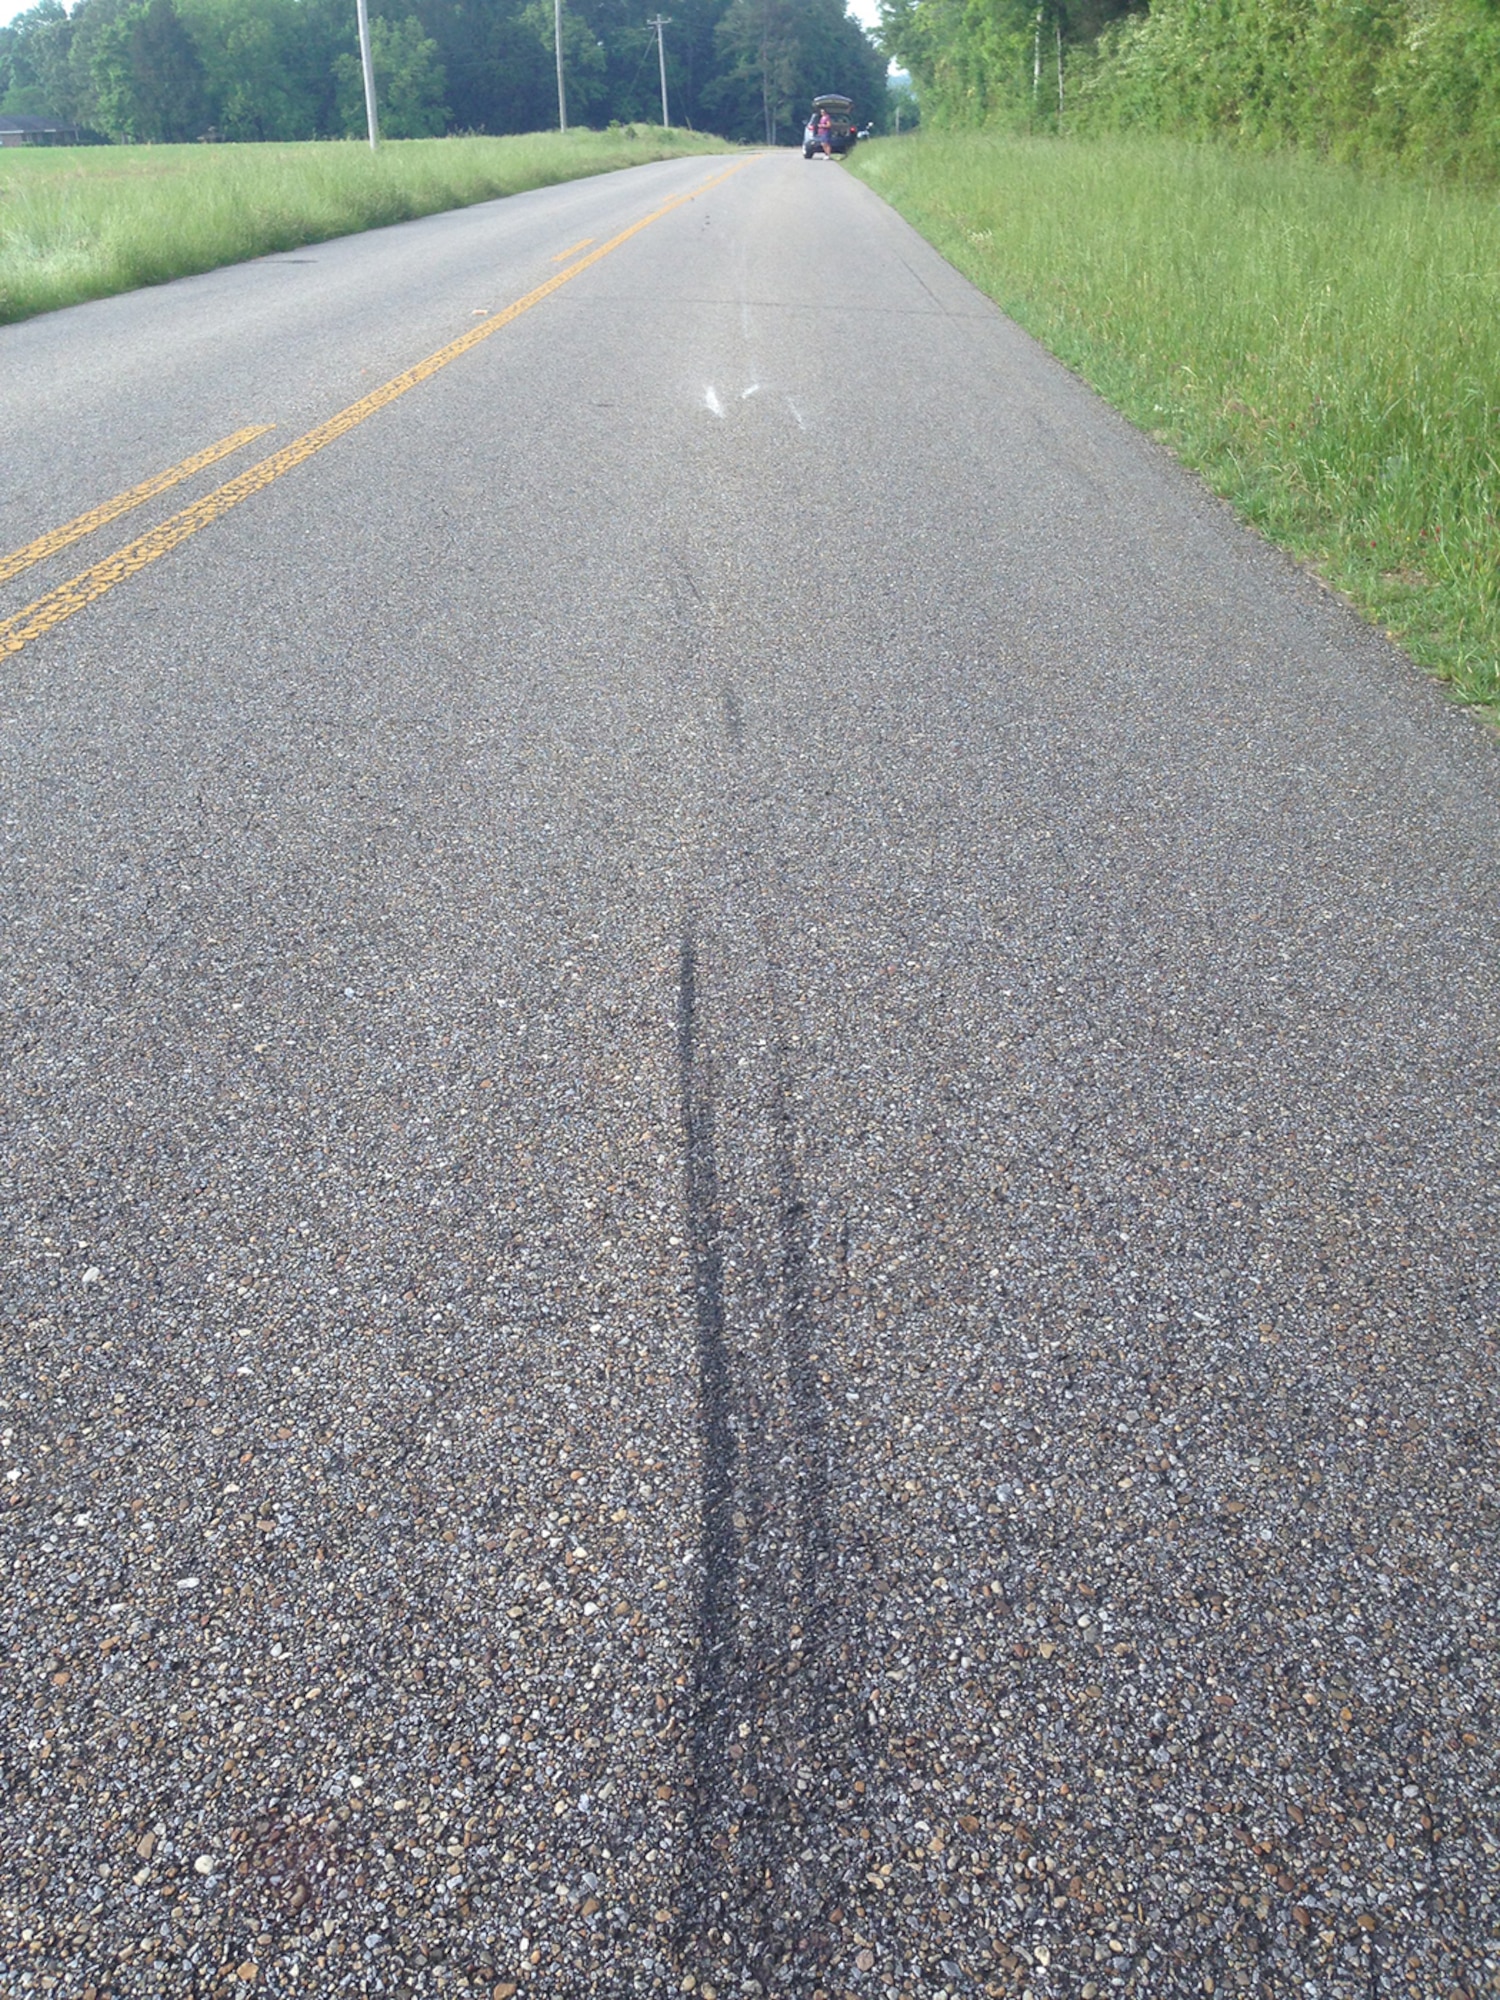 The road tells part of the story. The skid marks and scuffs on County Road 85 in Autauga County, Ala., show the results of a May 7 motorcycle-deer collision. (Courtesy photo by Maj. Jason Ross)